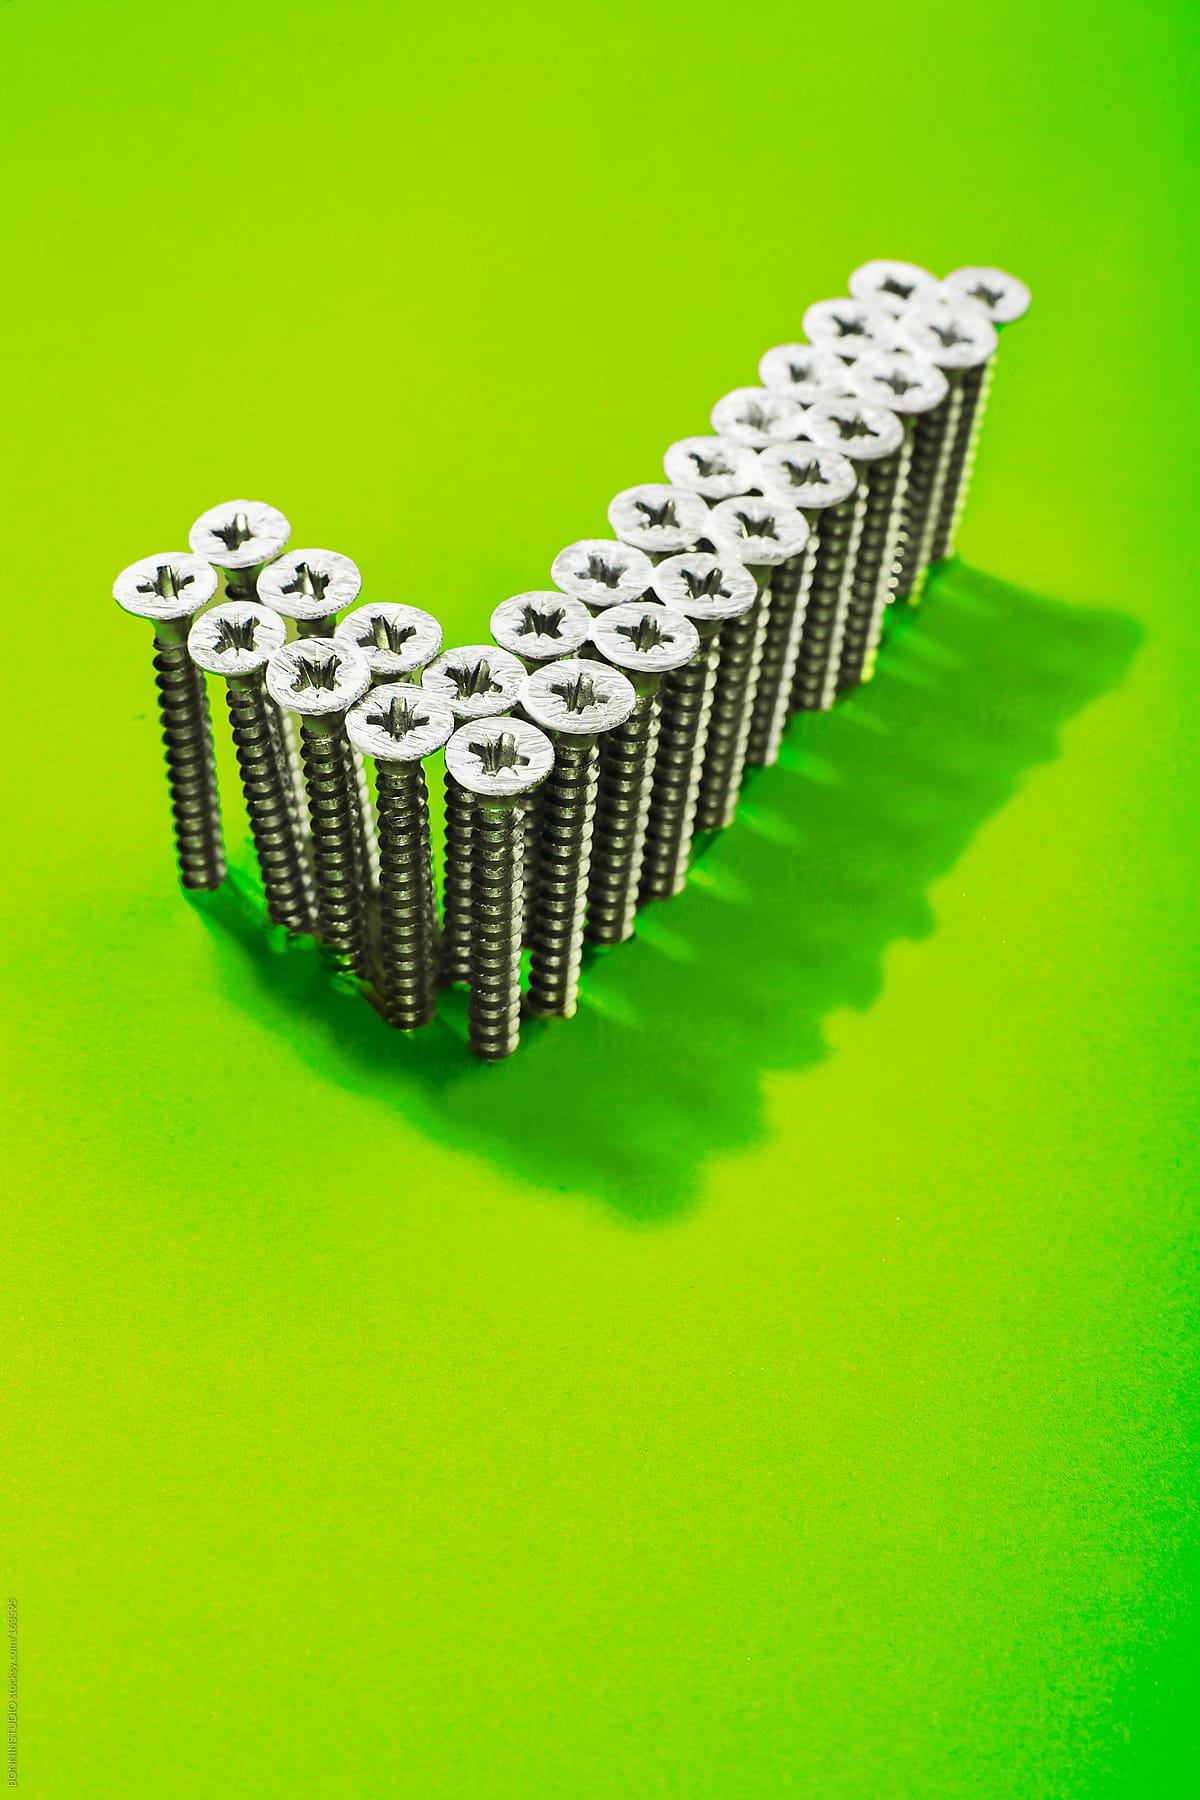 Check sing shaped with lot of screws on green background. Social media icon.